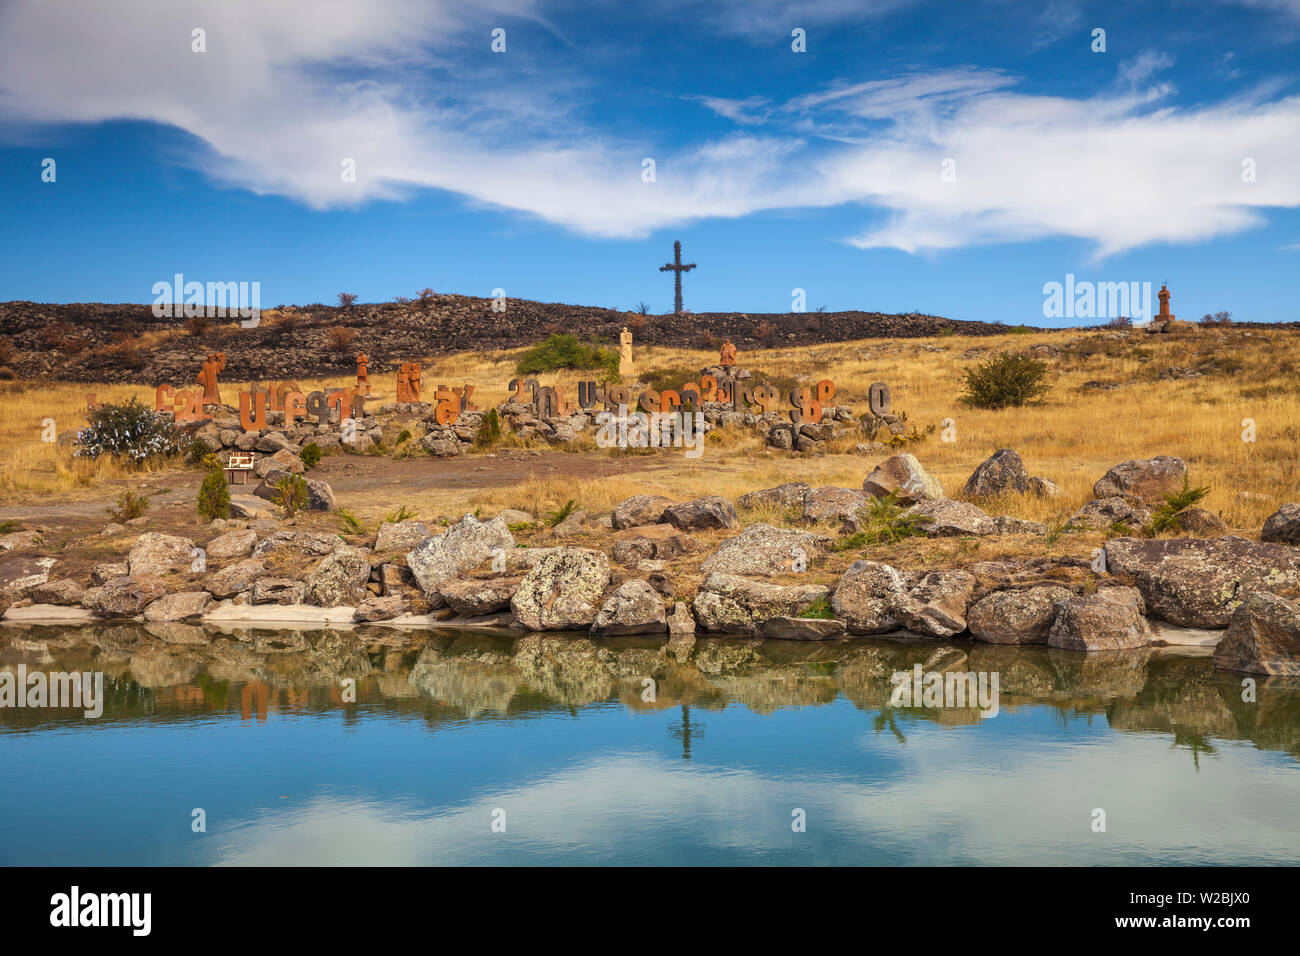 Armenia, Artashavan Village, Armenian alphabet monument - Giant stone letters dedicated to the founder of Armenia's alphabet, infront of Giant cross consisting of 1712 big and small crosses which symbolise Christianity as an official religion Stock Photo